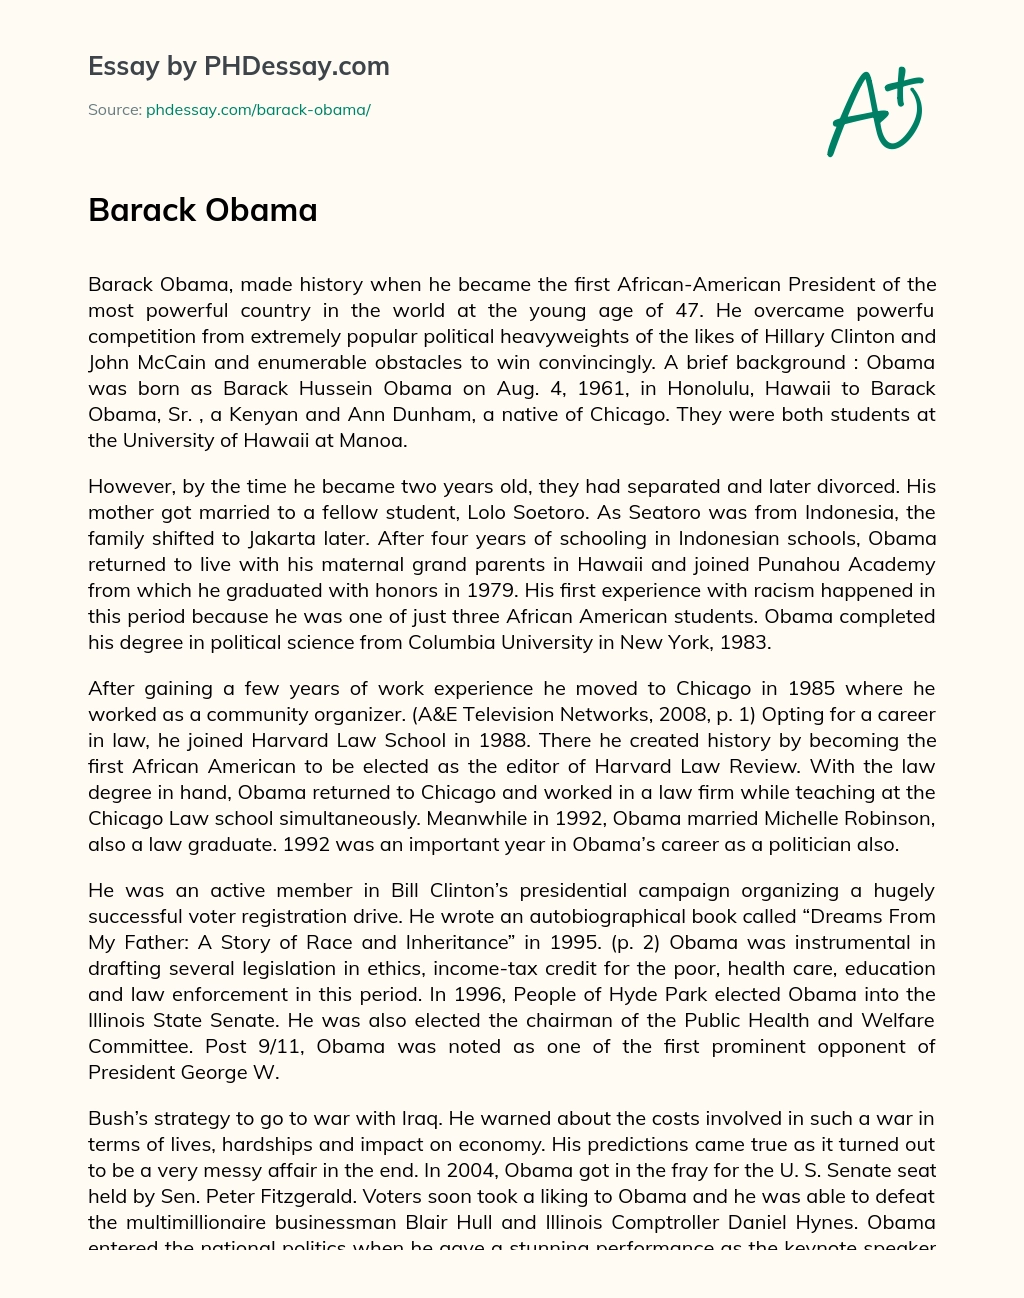 Barack Obama: The First African-American President of the United States essay